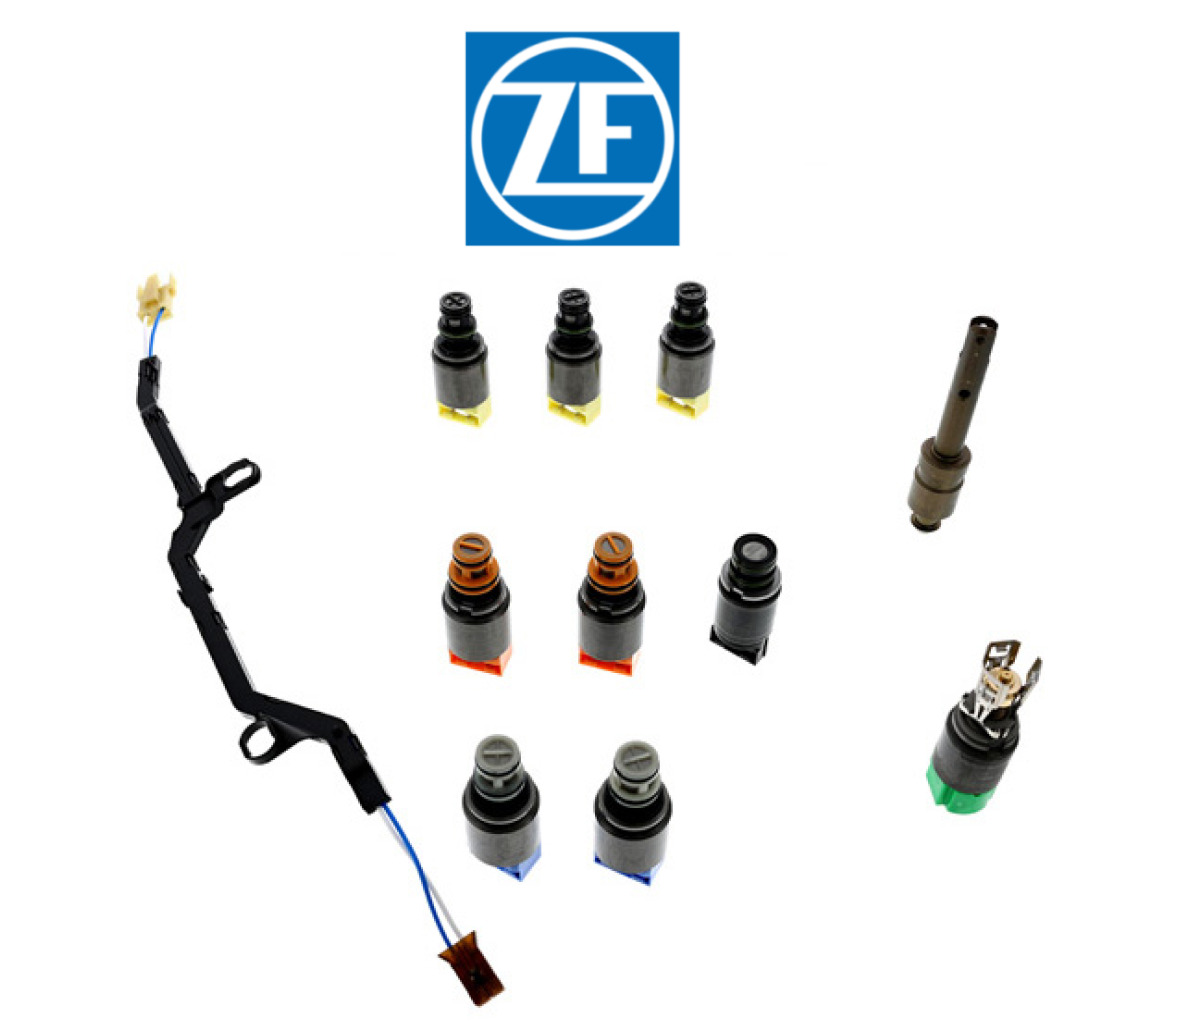 OEM Transmission Solenoid Valve Wire Kit Automatic (11pc) ZF for BMW 5 6 7 X5 X6